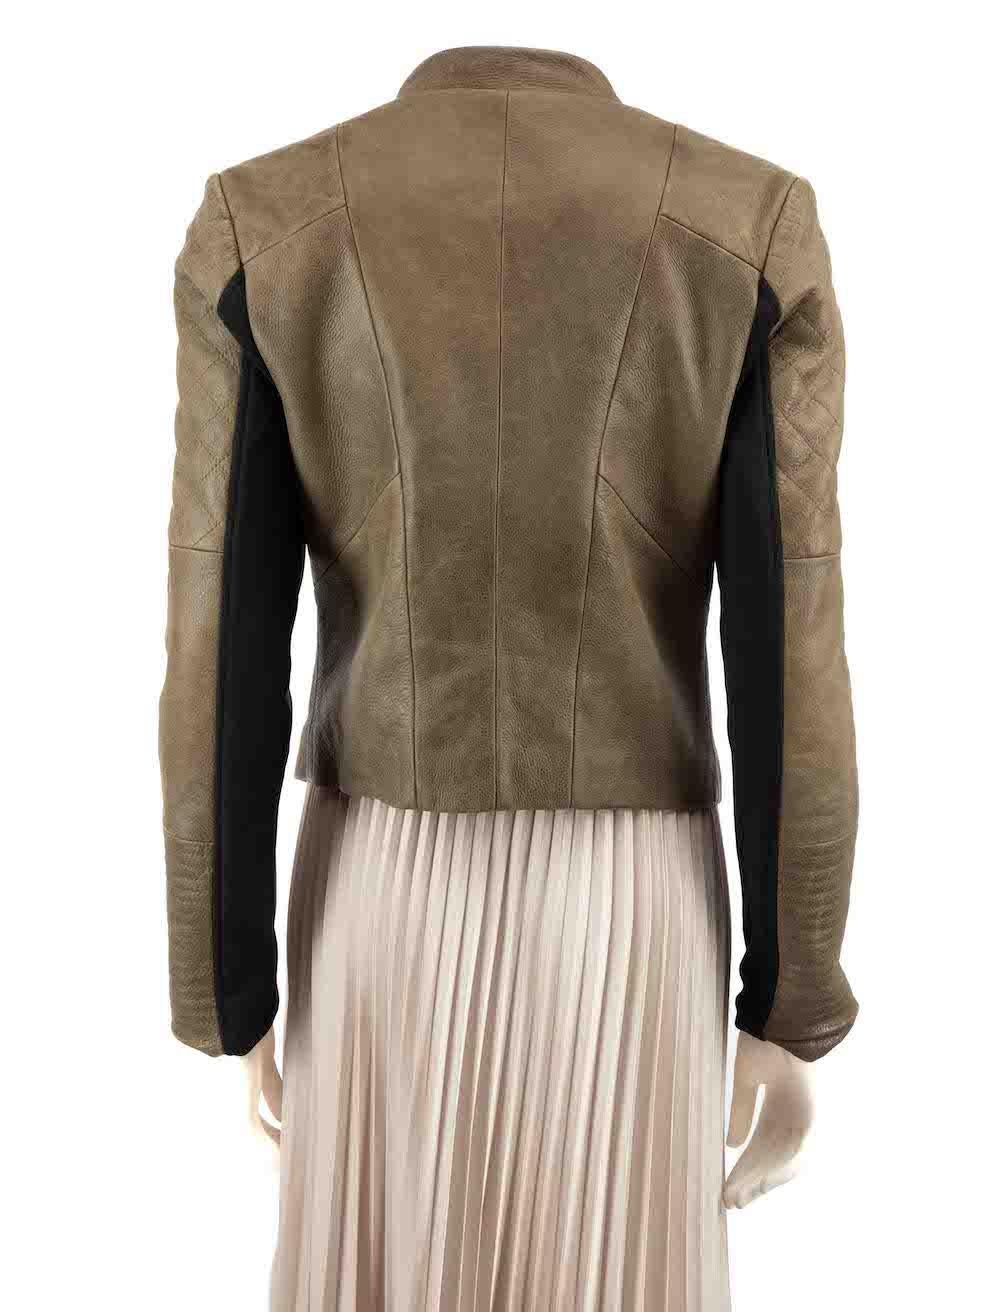 Francis Leon Khaki Leather Biker Jacket Size XS In Good Condition For Sale In London, GB